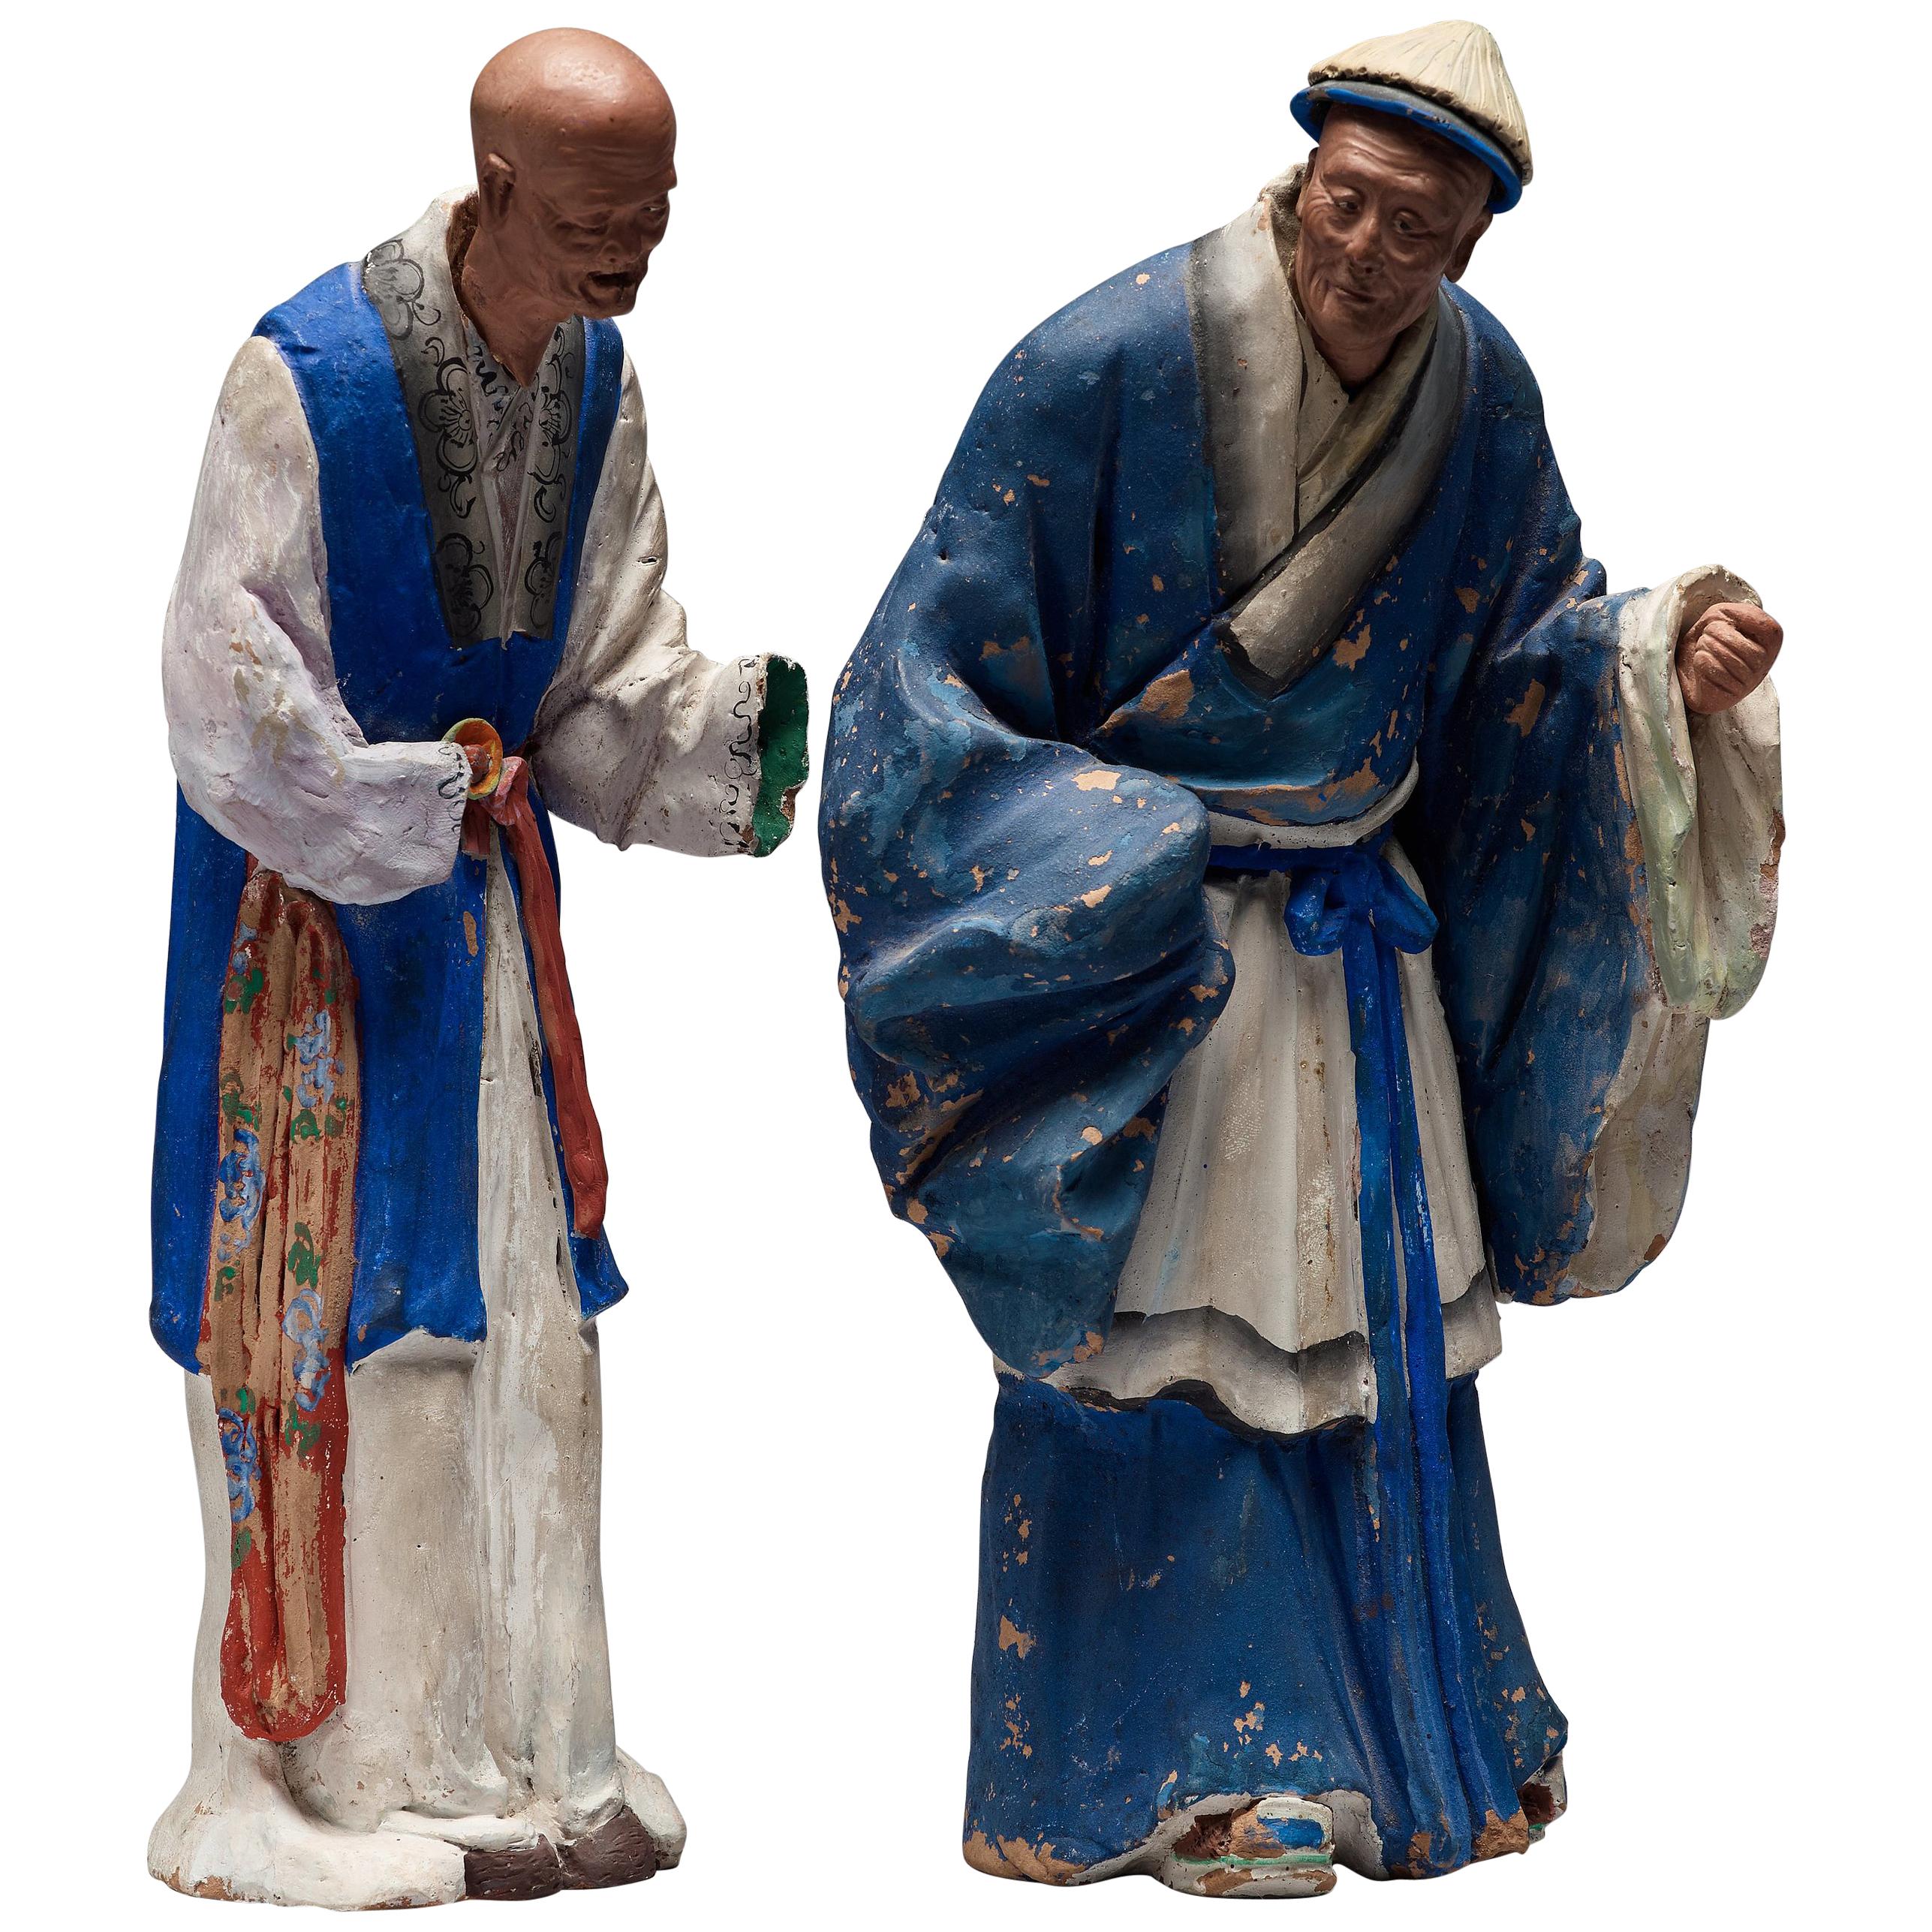 Two Chinese Figures in Sculptured and Painted Clay, Early 20th Century